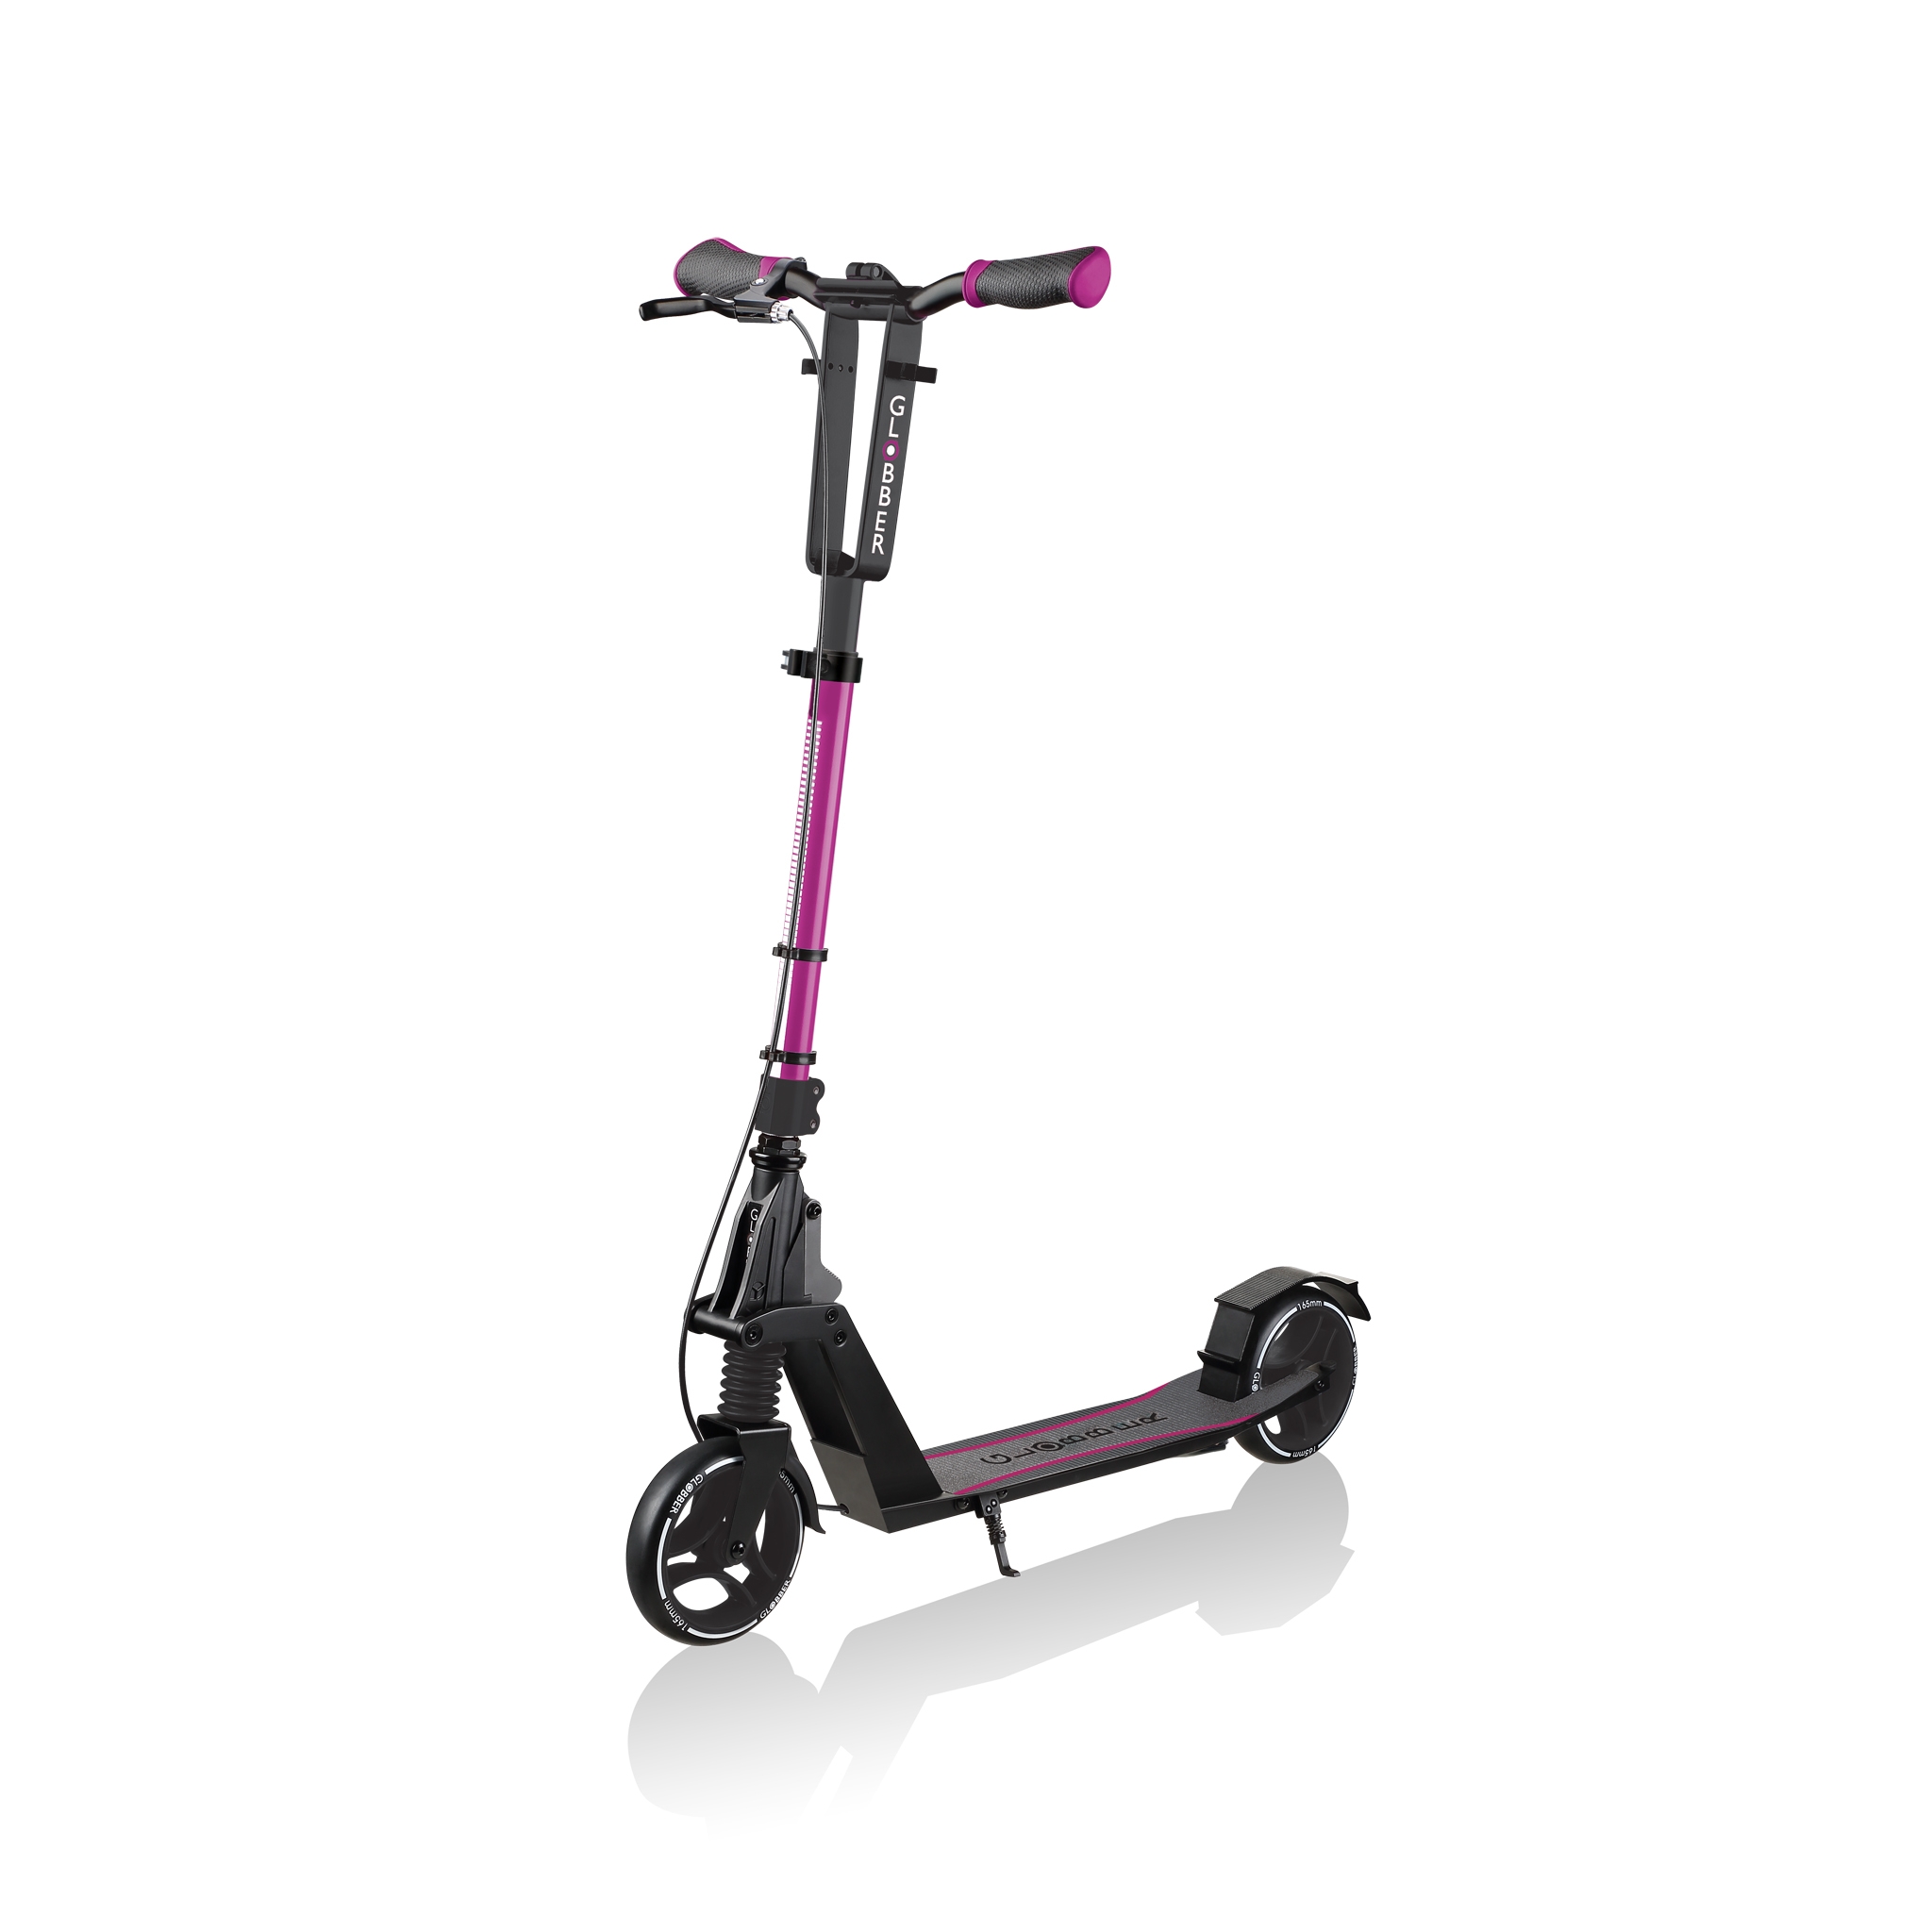 ONE-K-165-BR-award-winning-2-wheel-foldable-scooter-for-teens-and-adults-aged-14-and-above_ruby 0